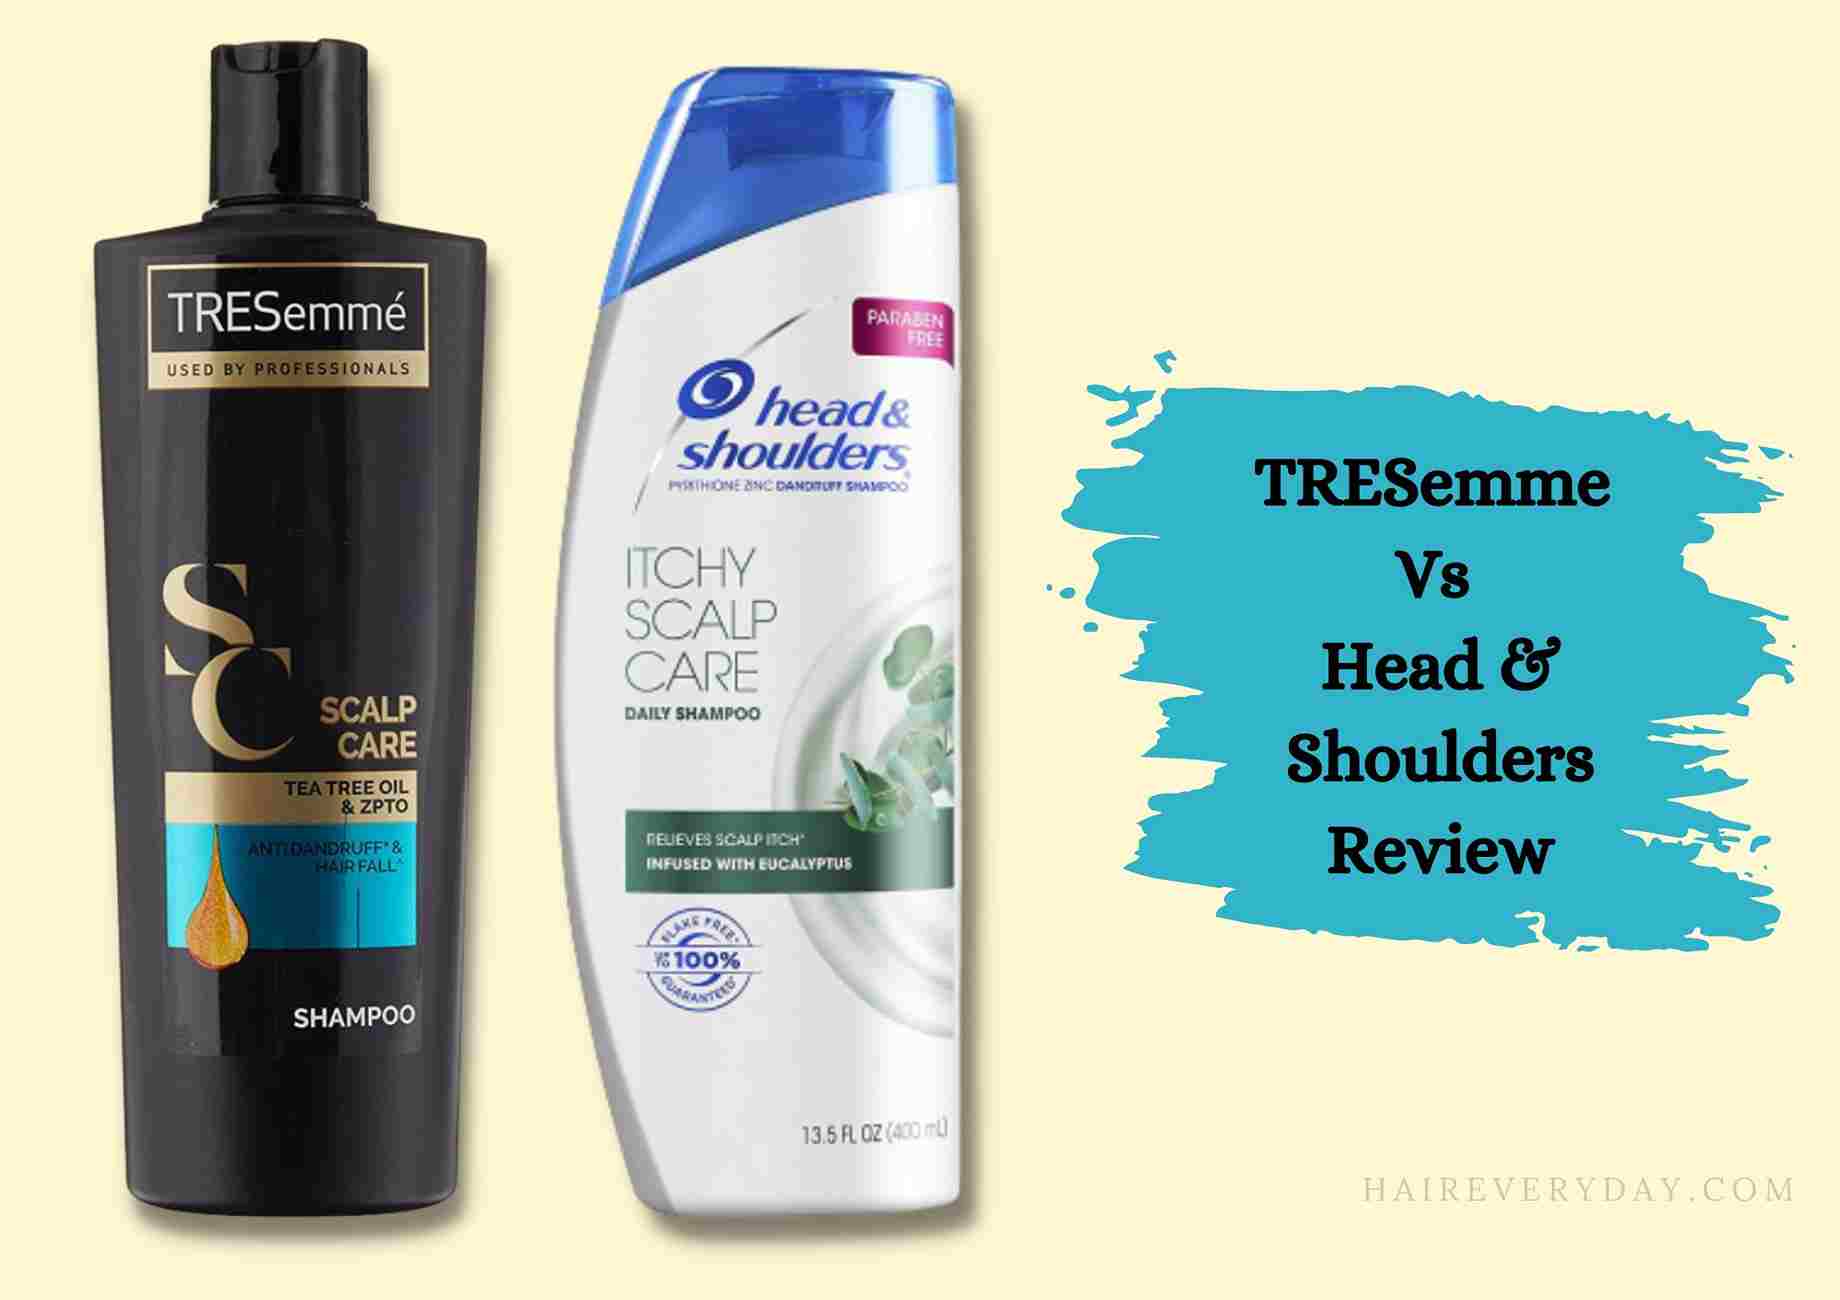 Which shampoo is the best, Tresemme or Dove? - Quora